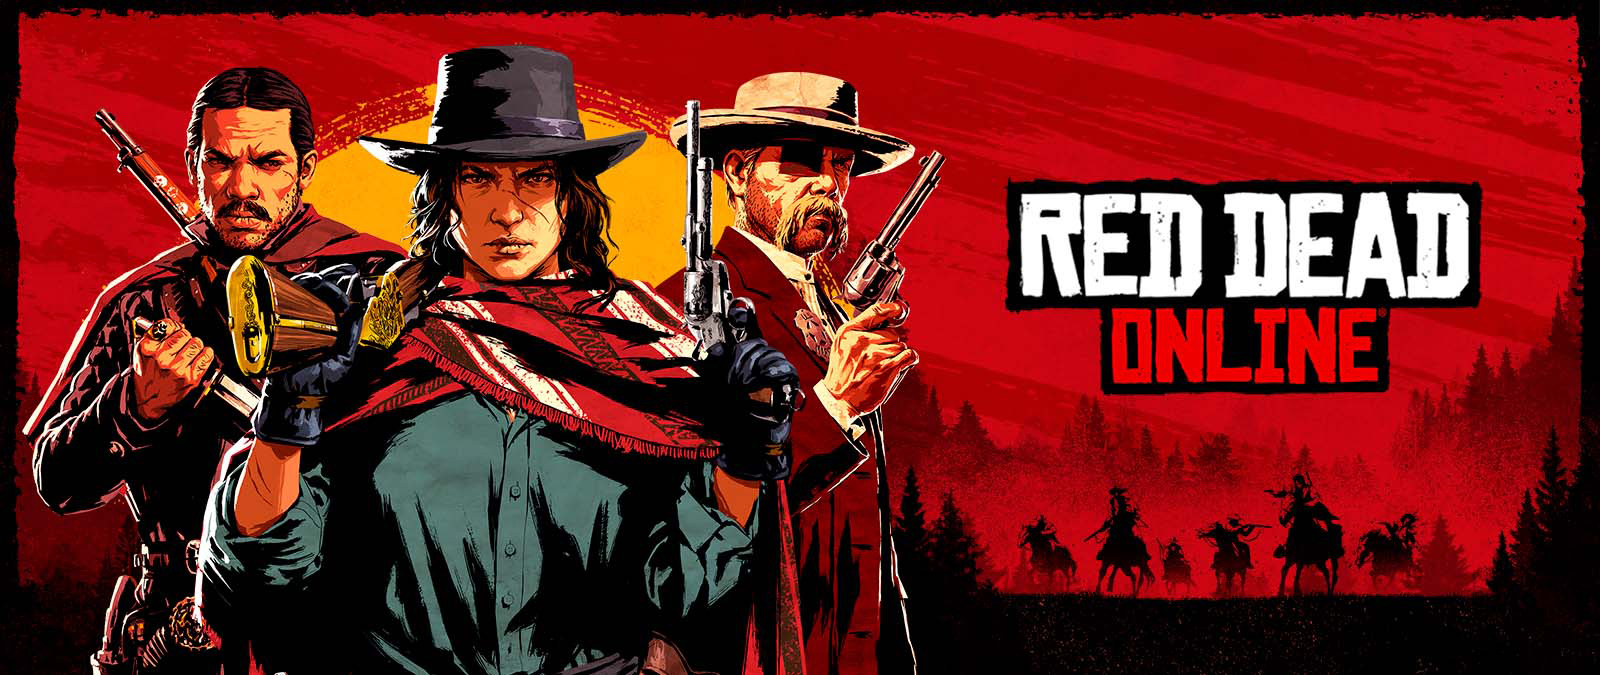 Red Dead Redemption 2 | Xbox